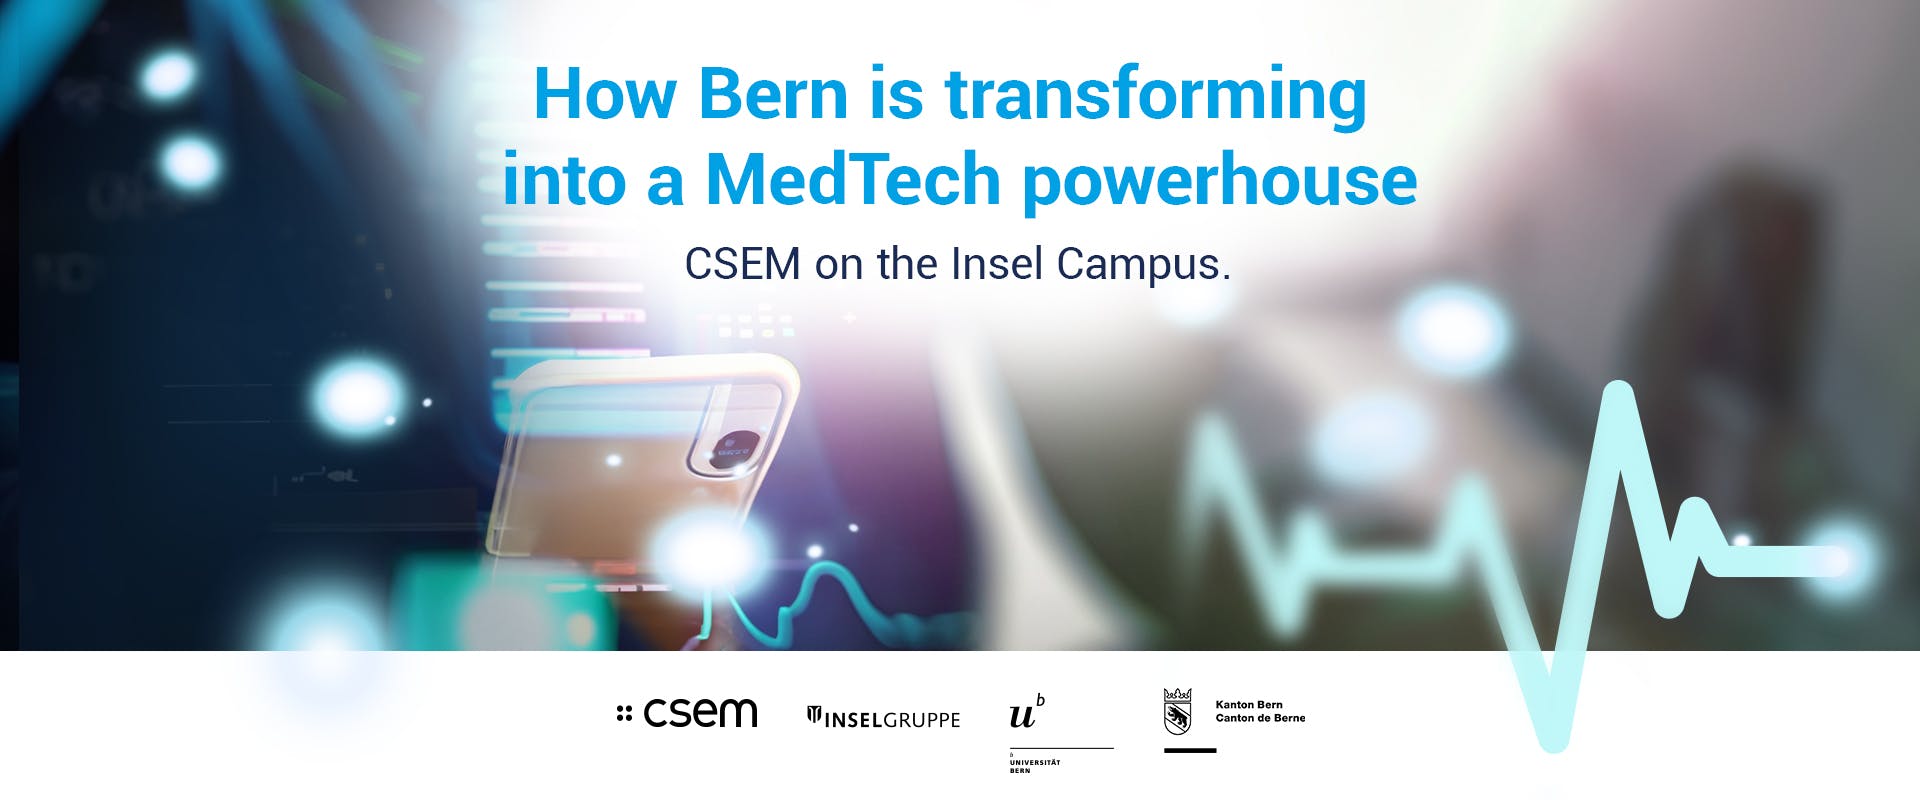 How Bern is transforming into a MedTech powerhouse. CSEM on the Insel Campus.